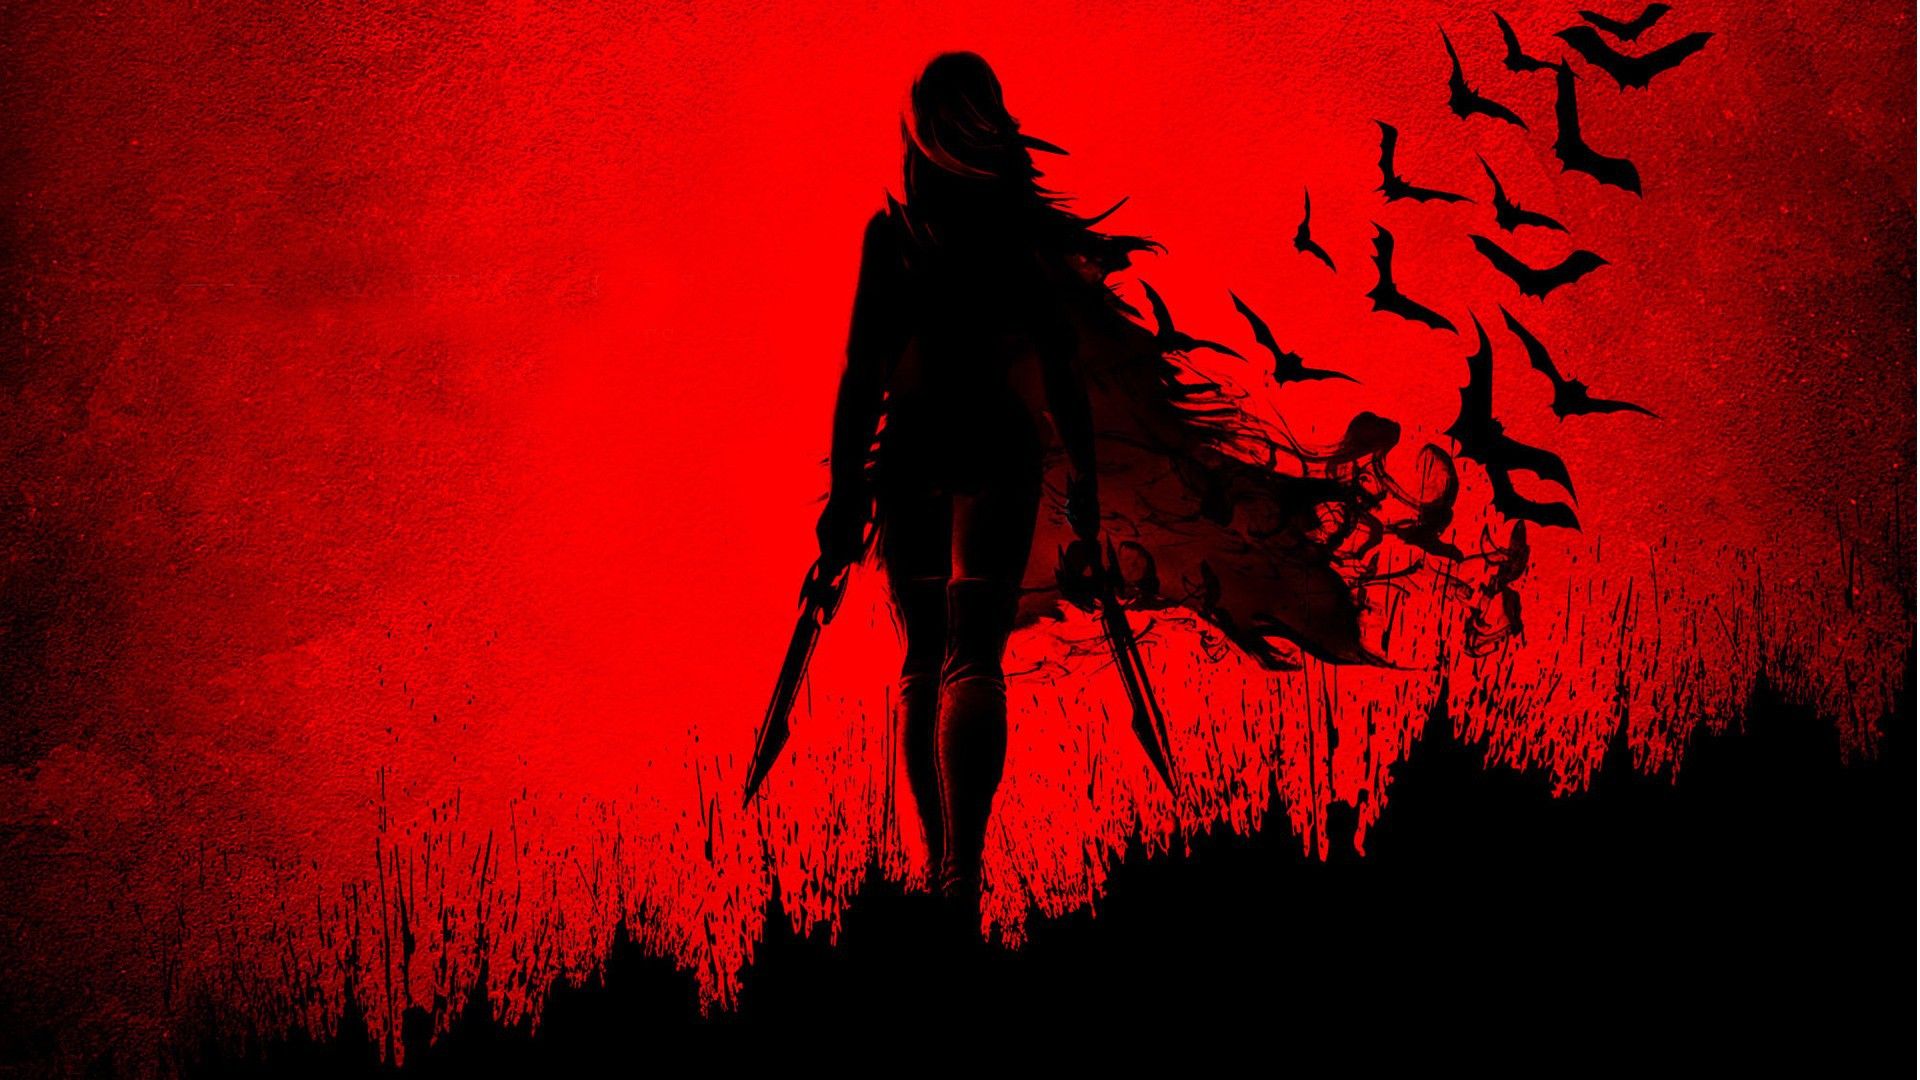 Abstract, Red Background Wallpapers And Images - Raven Dc Wallpaper Hd - HD Wallpaper 